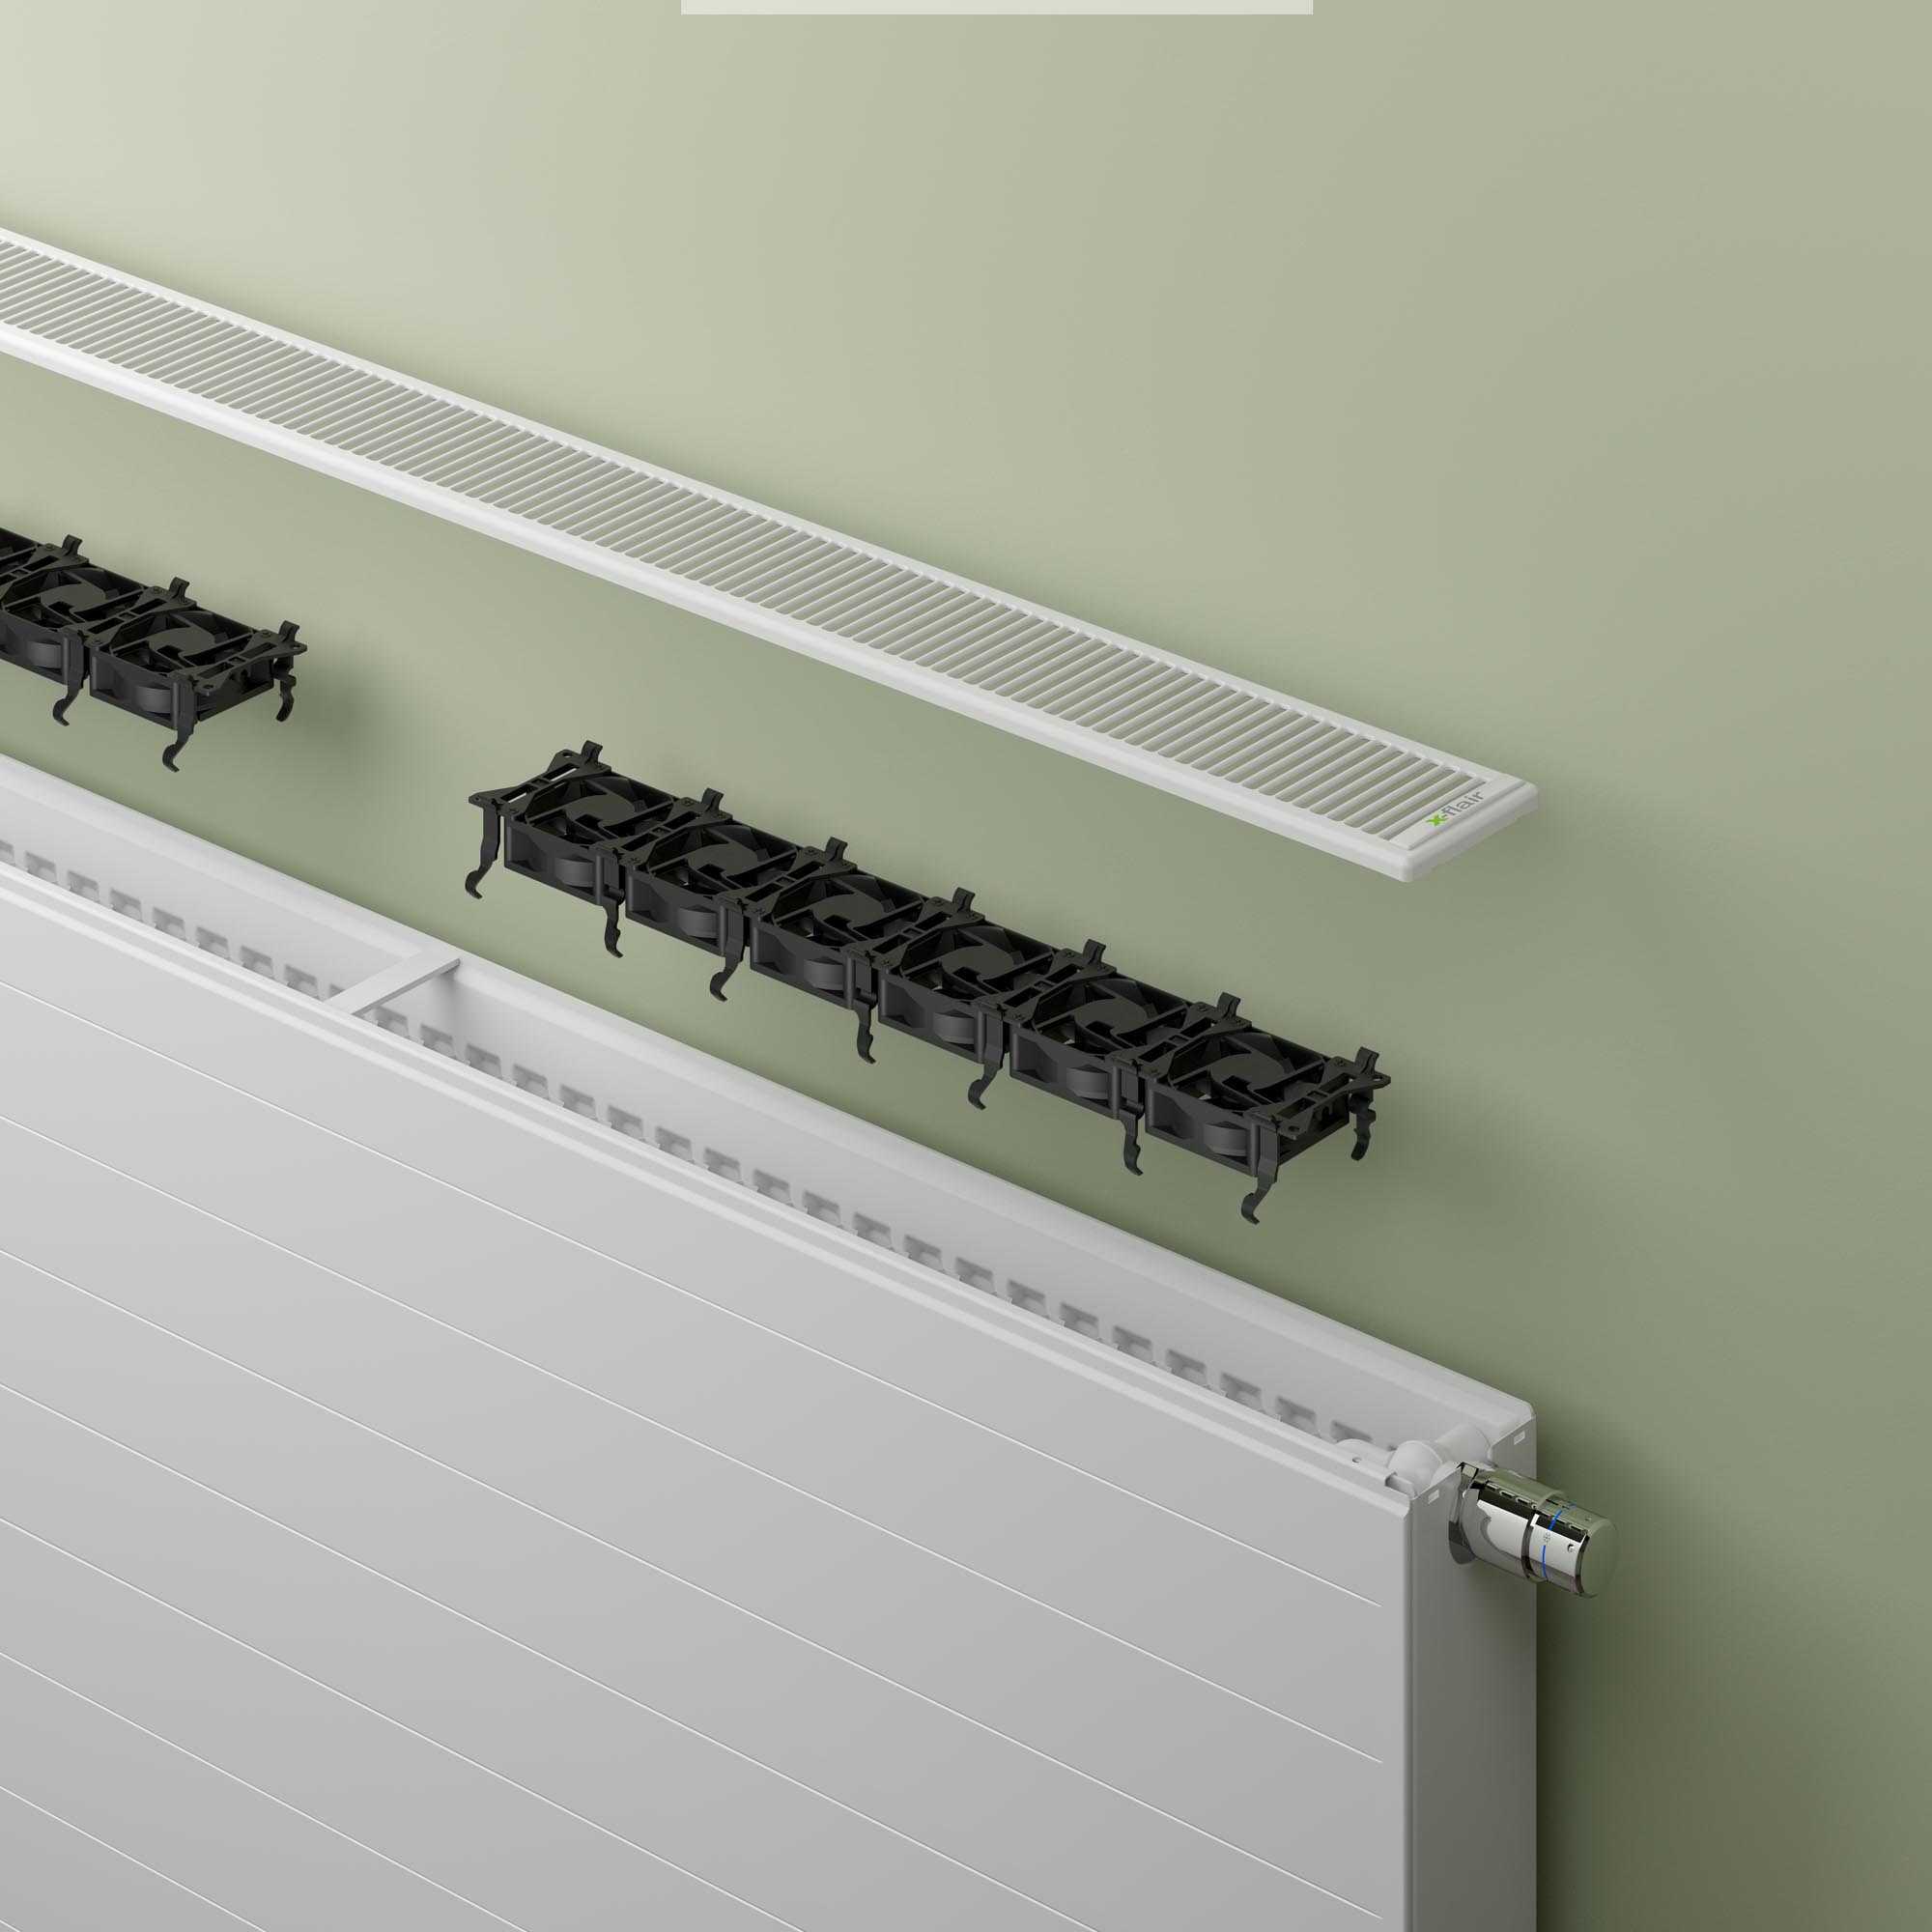 Kermi x-flair radiators with x2 technology and integrated fans.